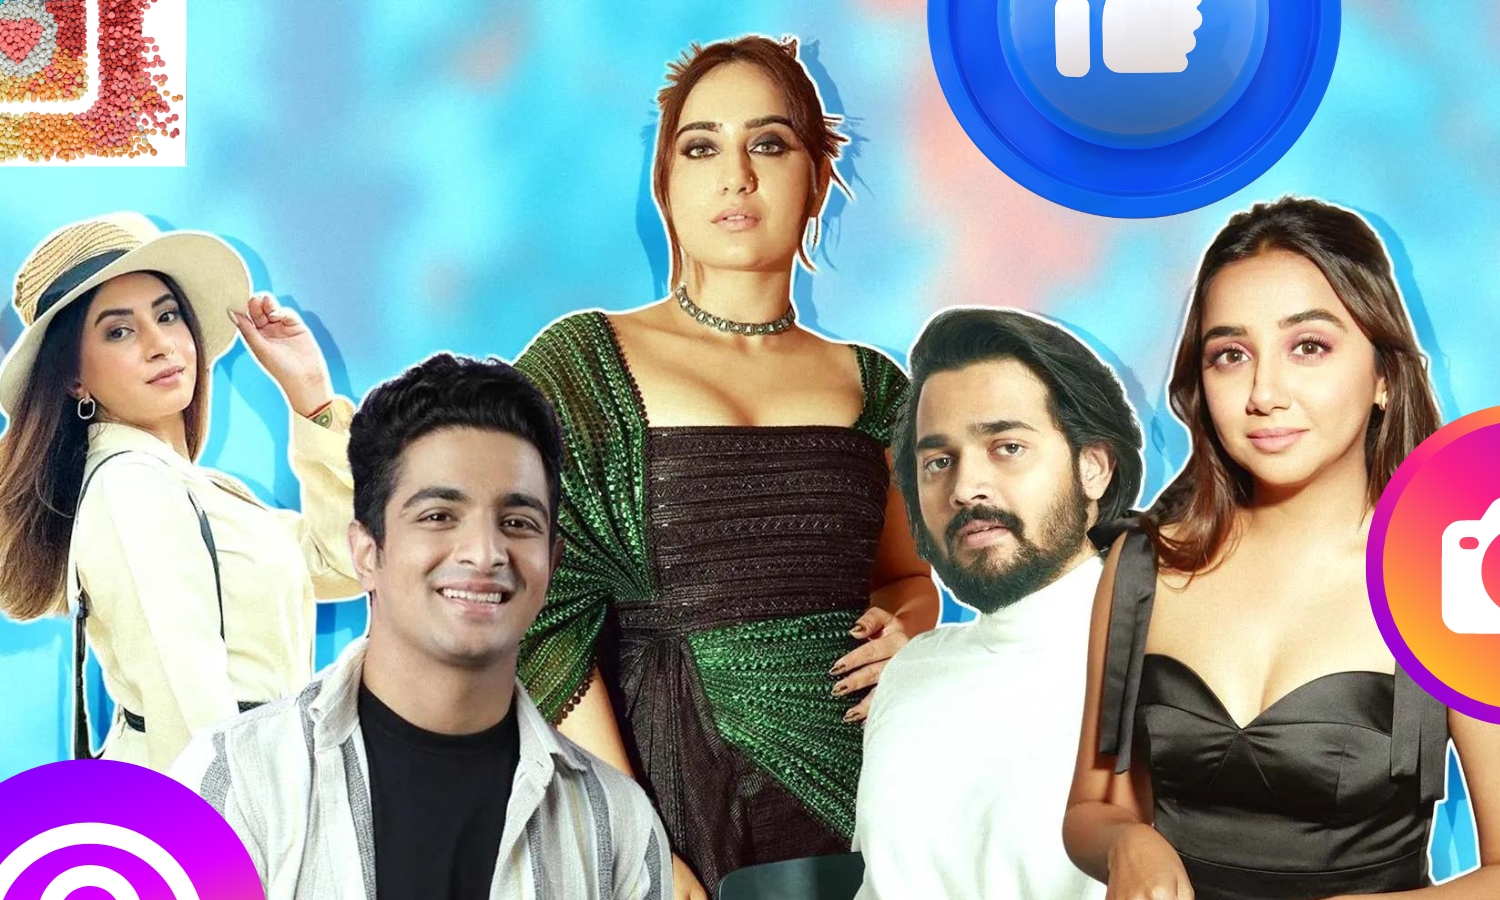 Influencer Earnings: Indian Celebrities Reportedly Earn 77 Lakh to 15 Lakh Per Instagram Video